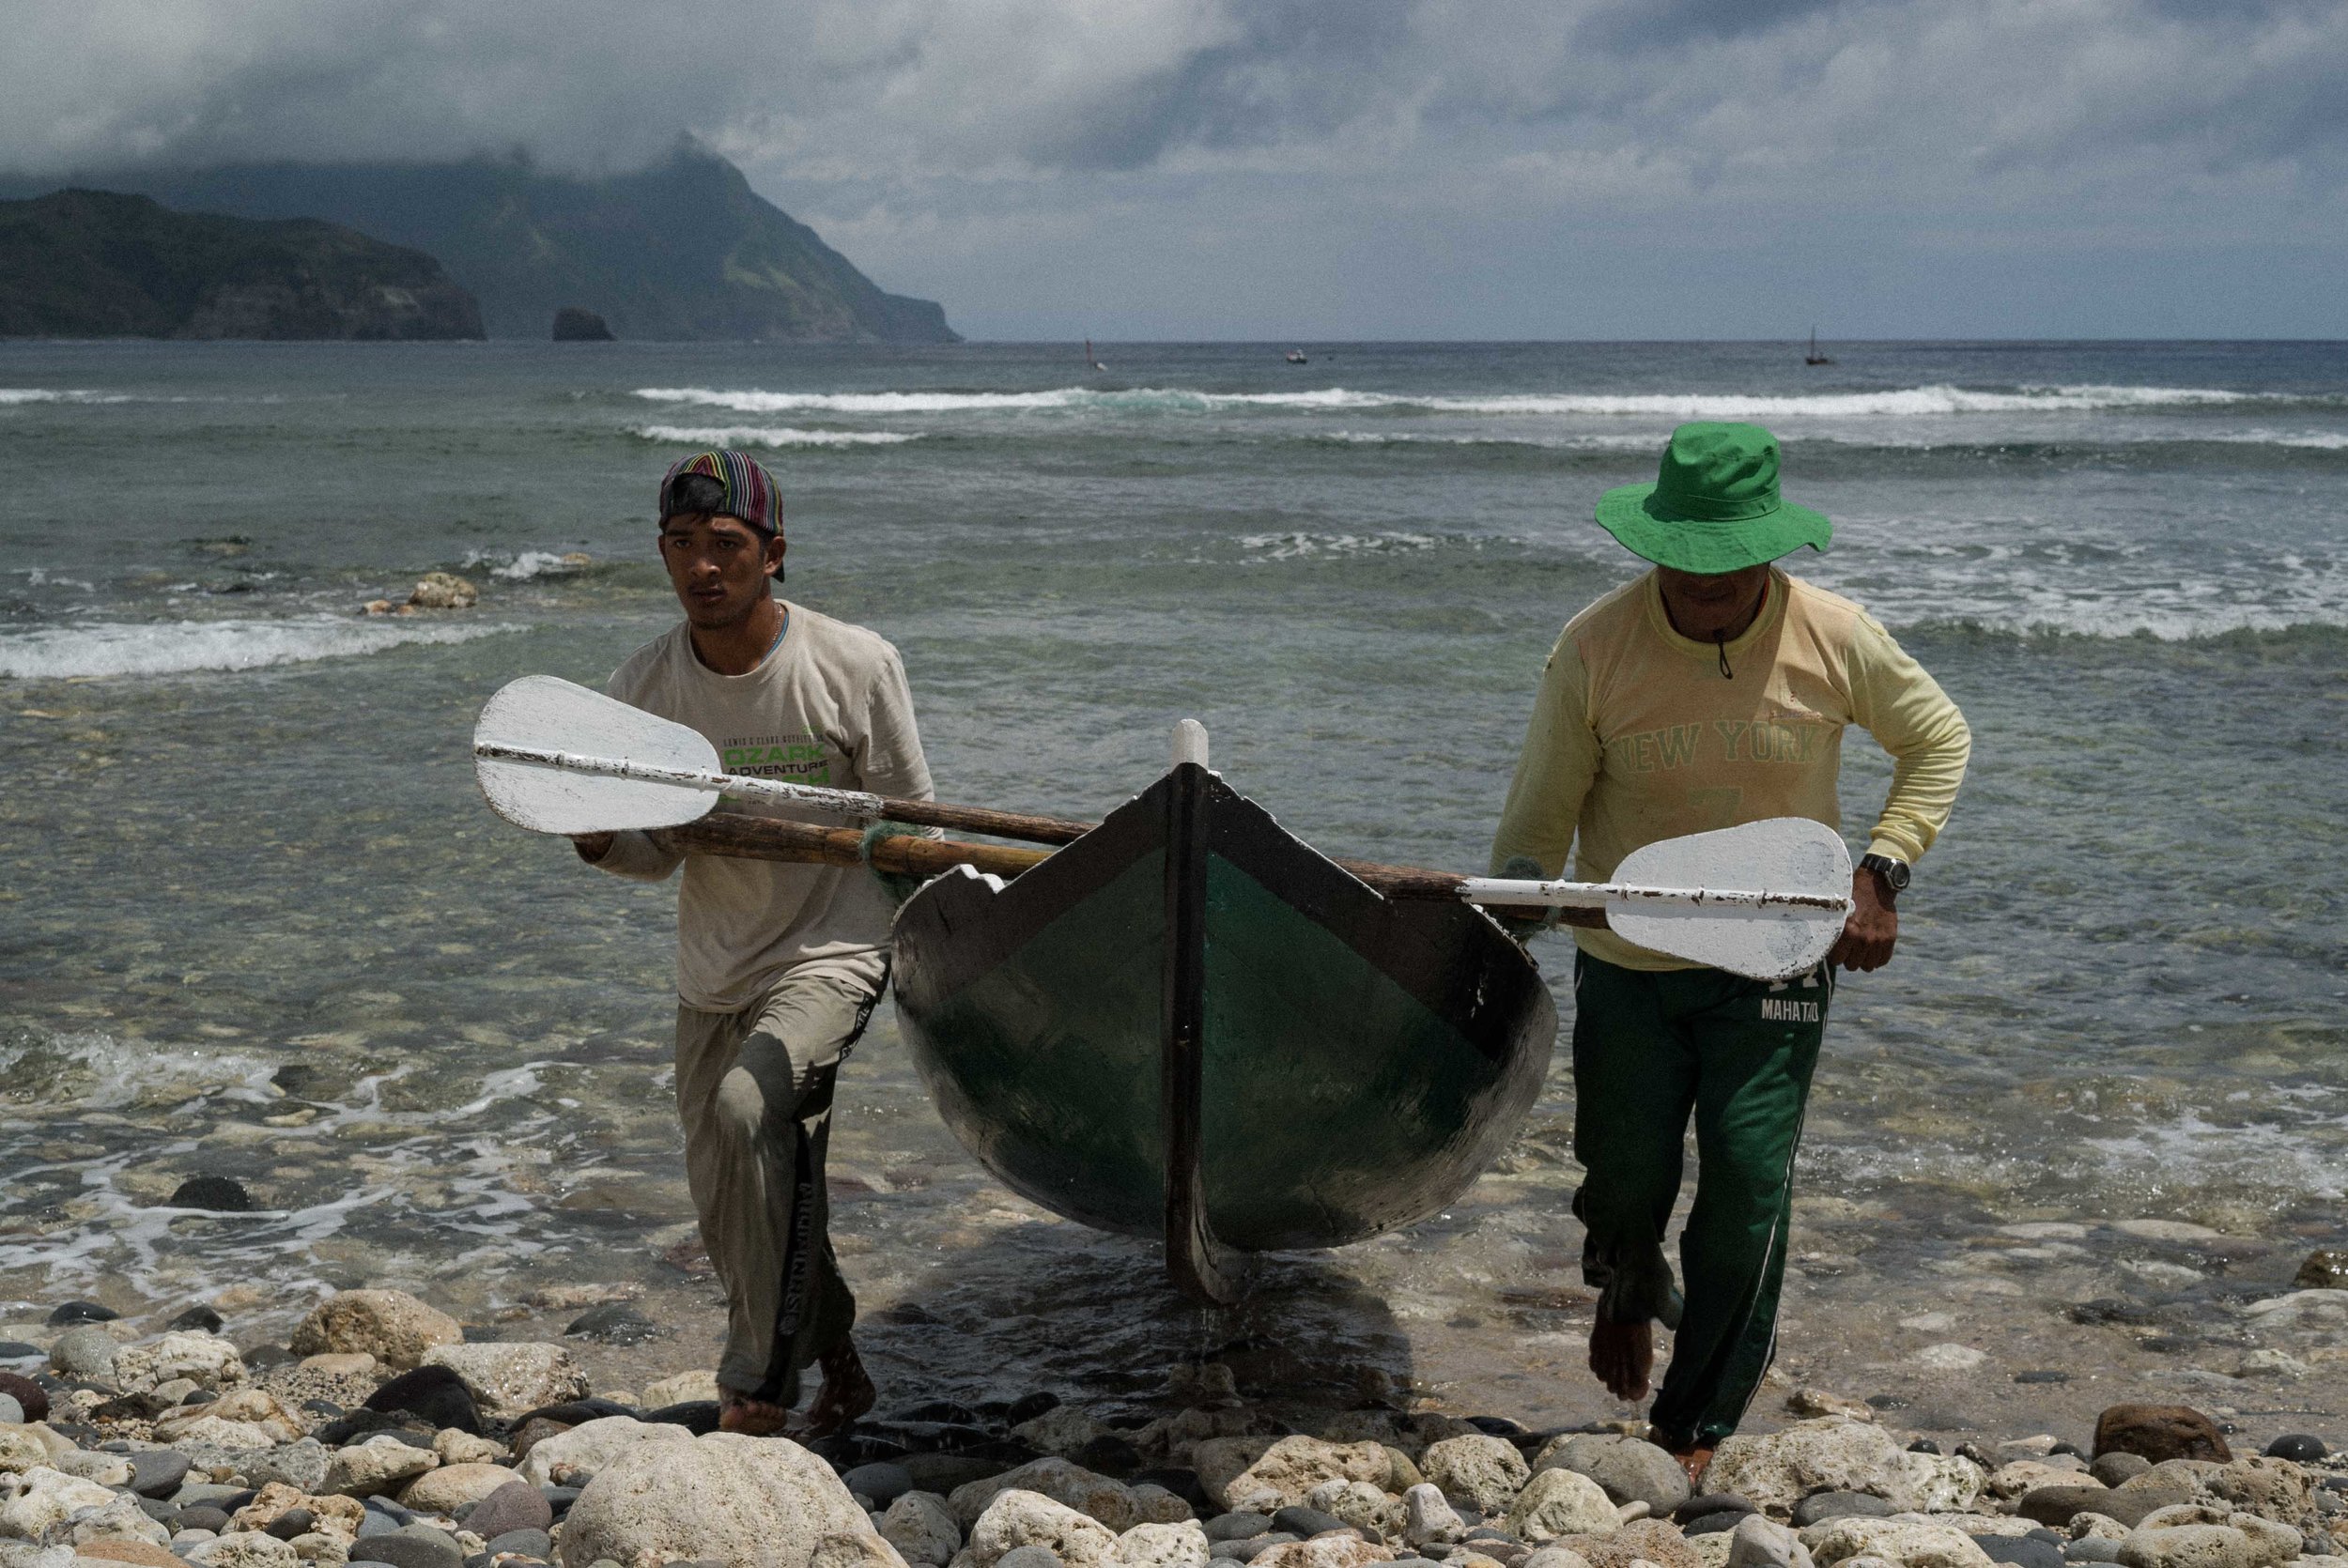  Fellow fishermen help carry other boats. 